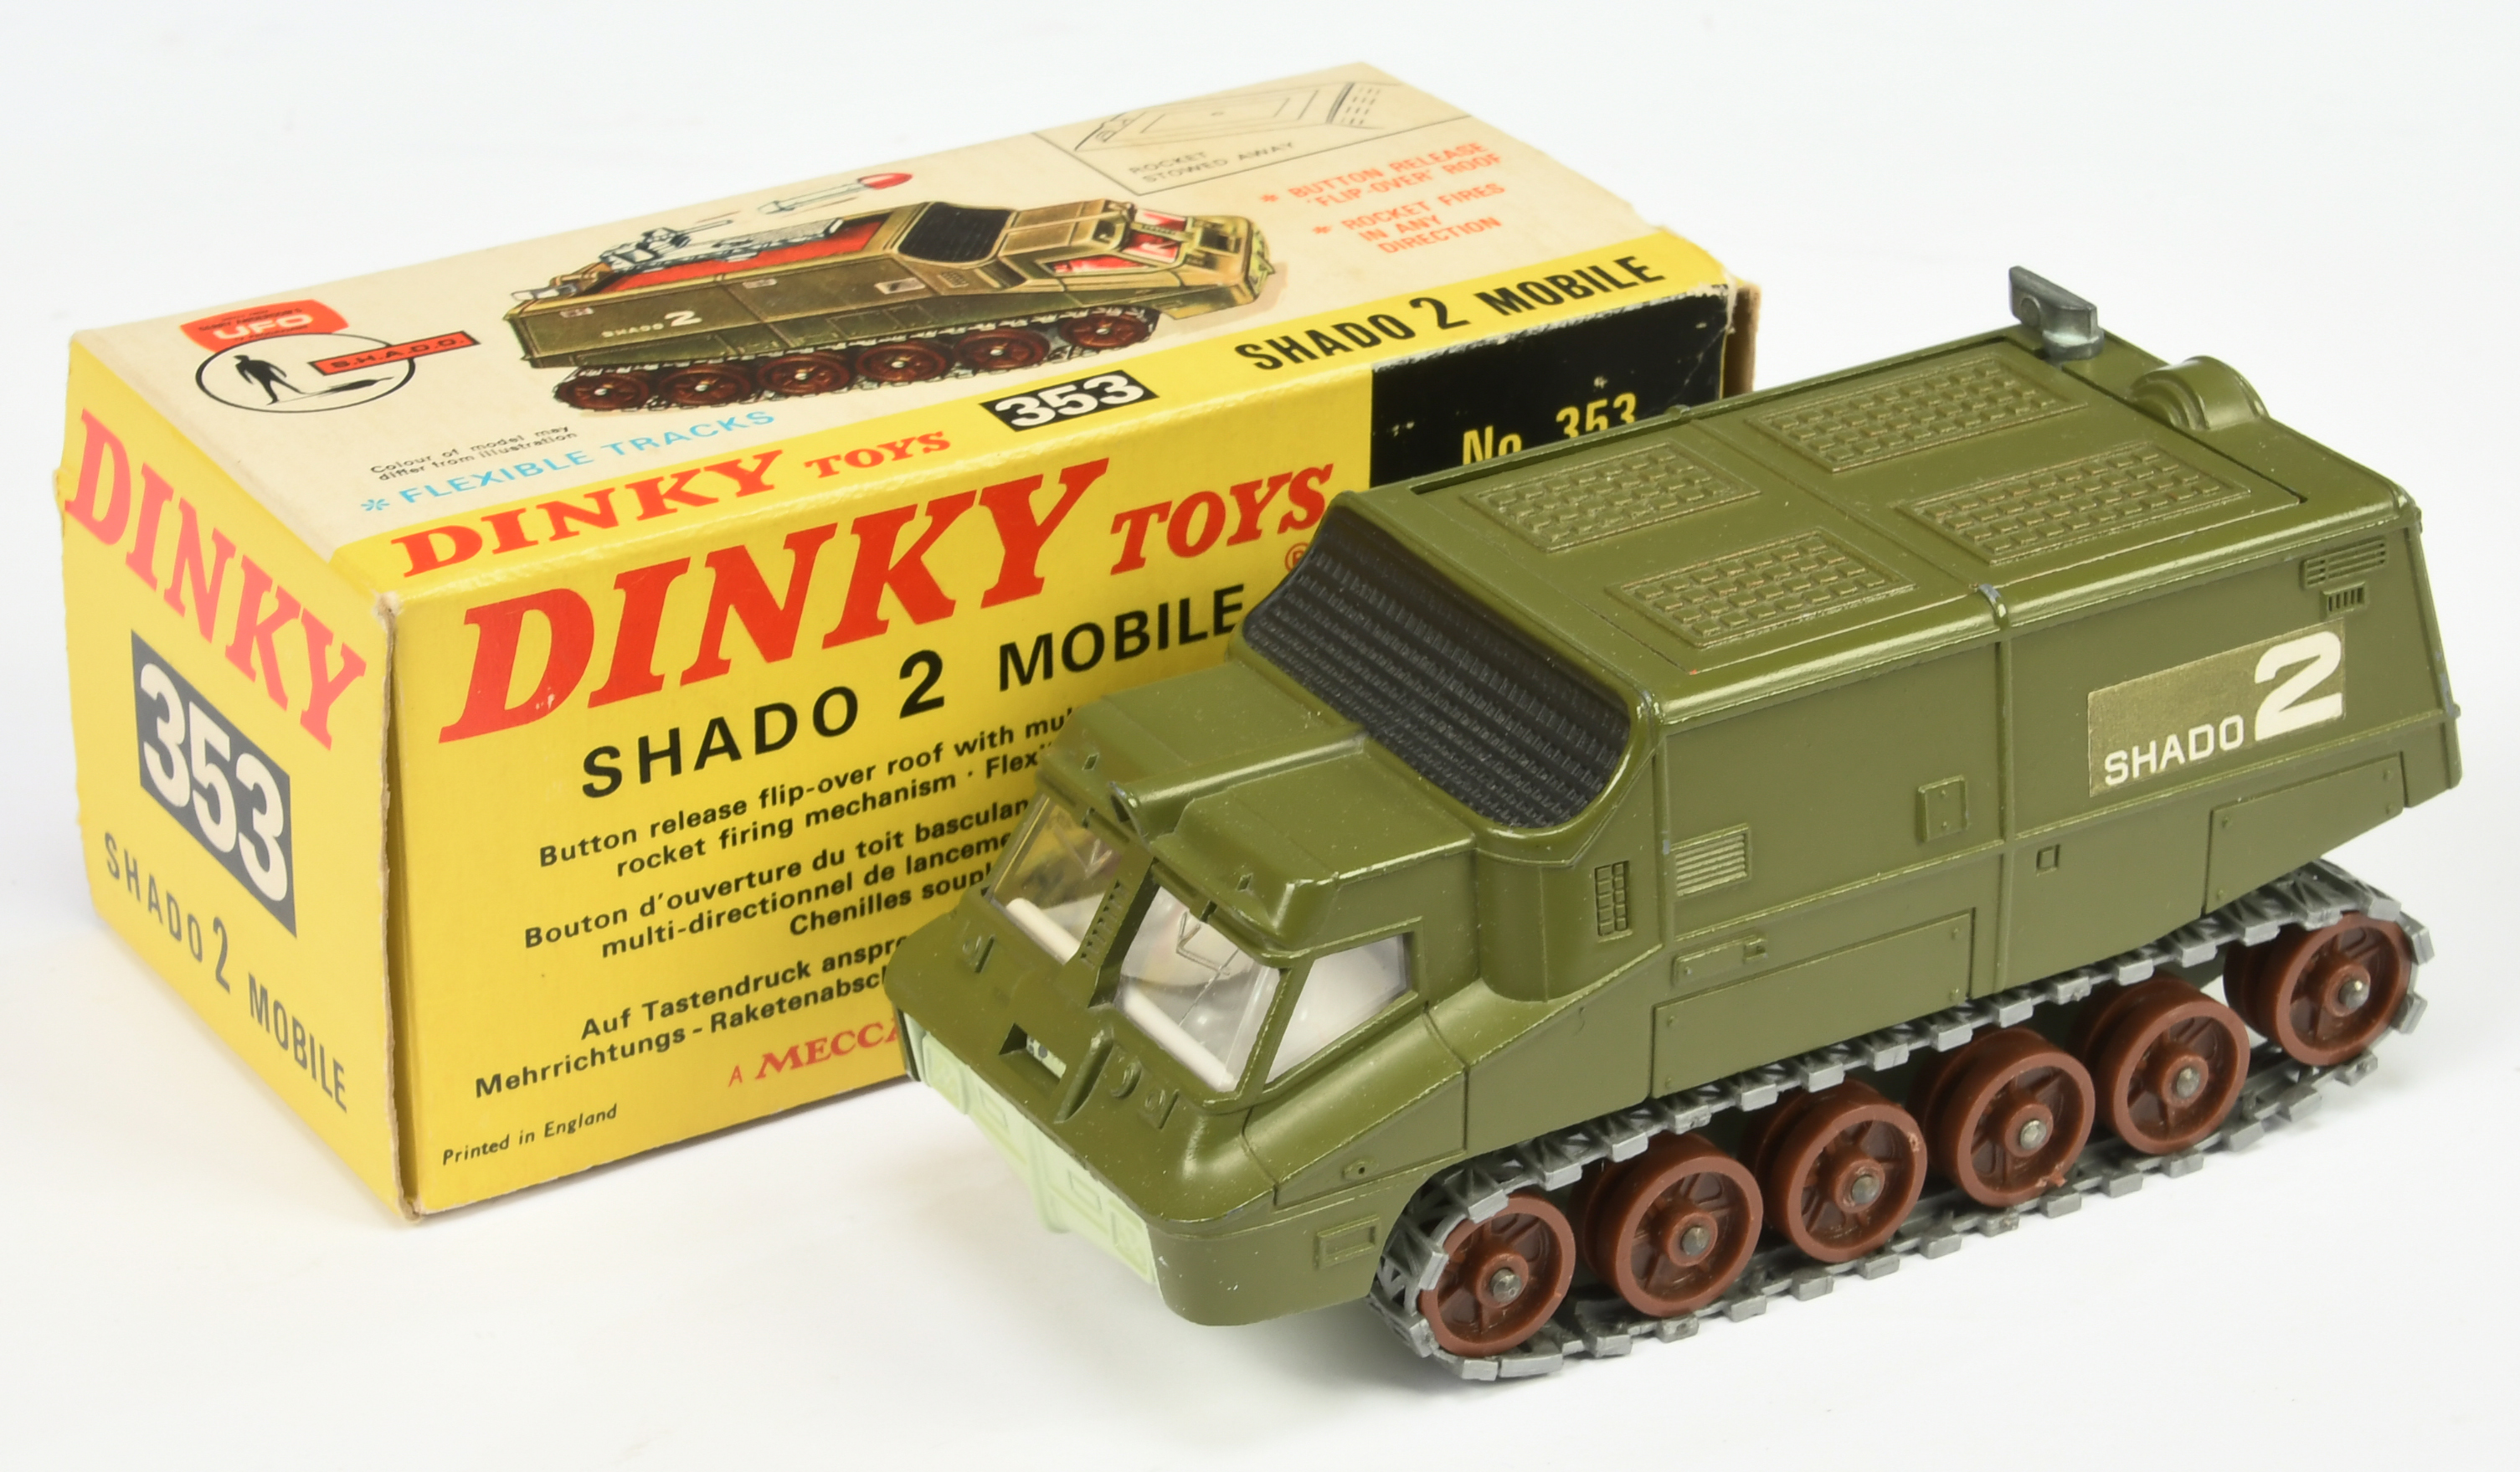 Dinky Toys 353 "UFO" Shado 2 Mobile - Green body, pale green base, off white interior, large brow...